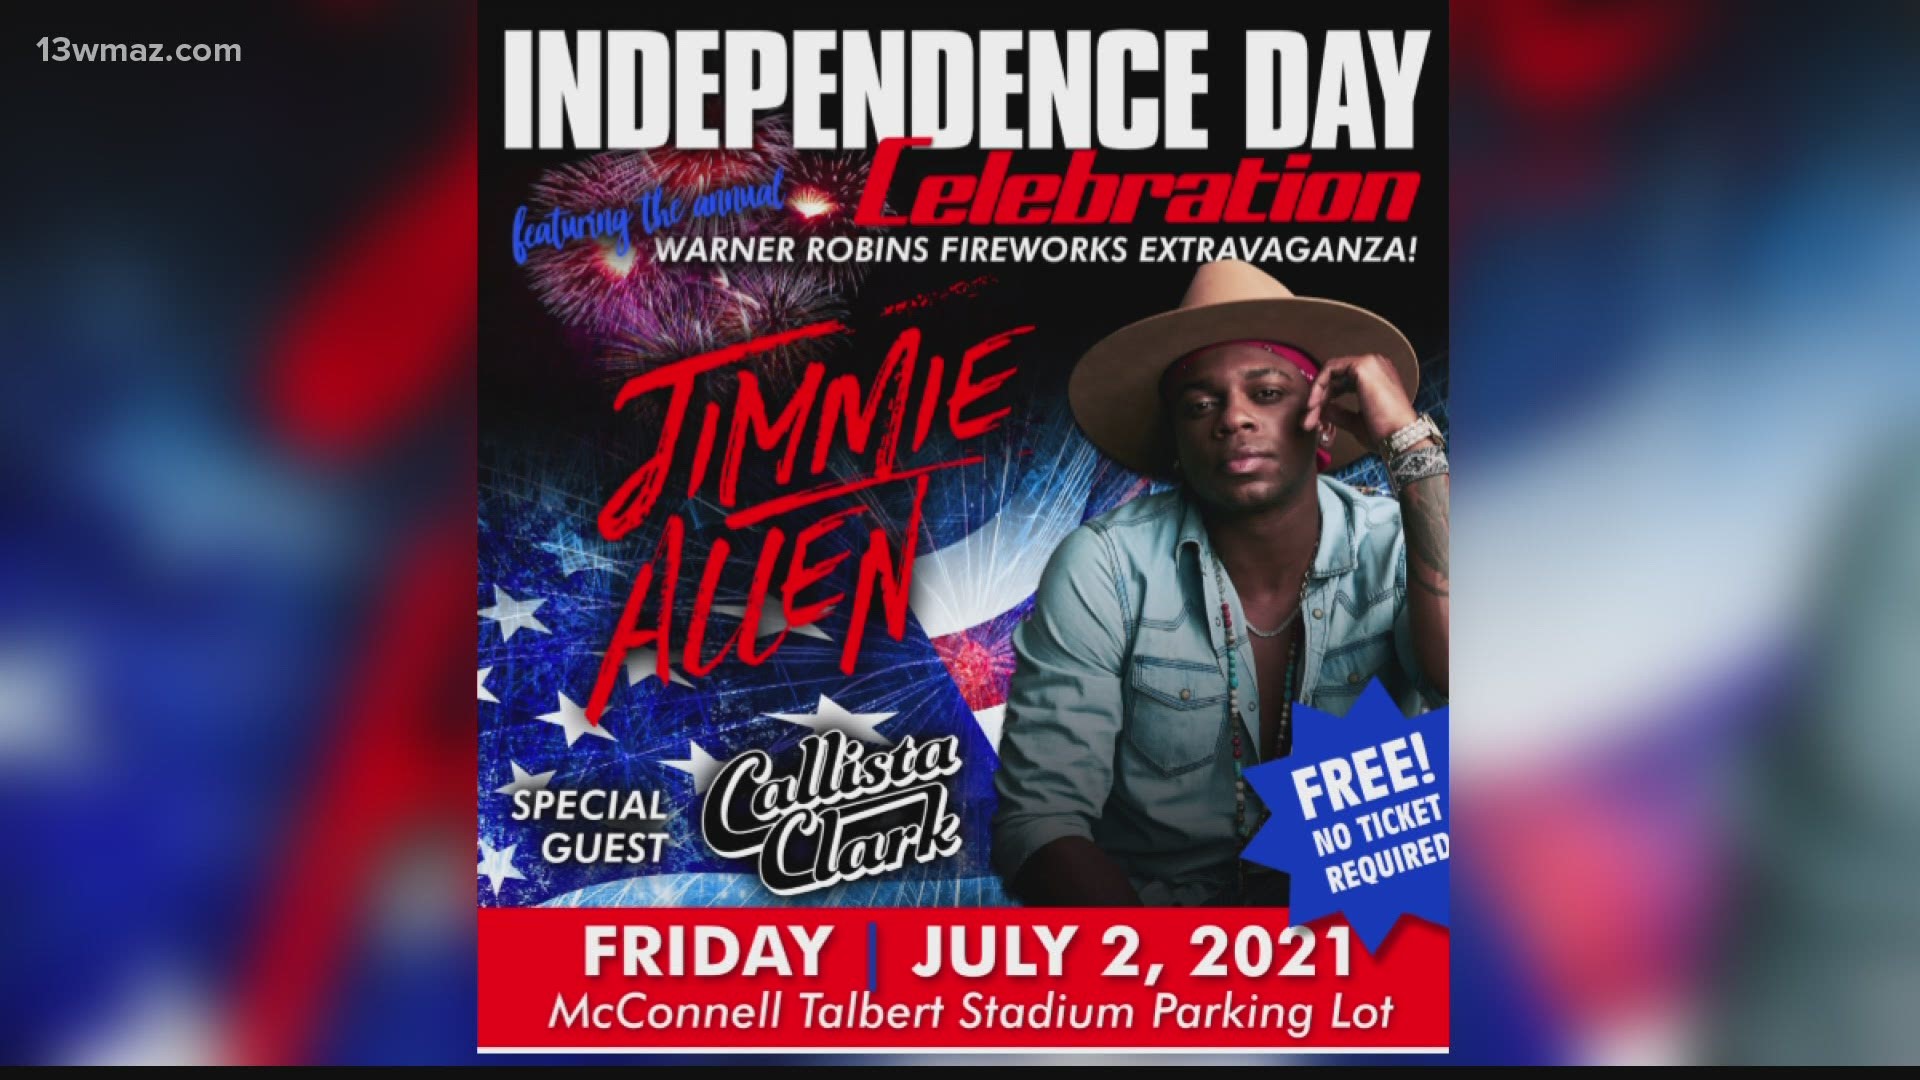 On Wednesday, the City of Warner Robins Convention & Visitors Bureau announced the headline performer will be Jimmie Allen